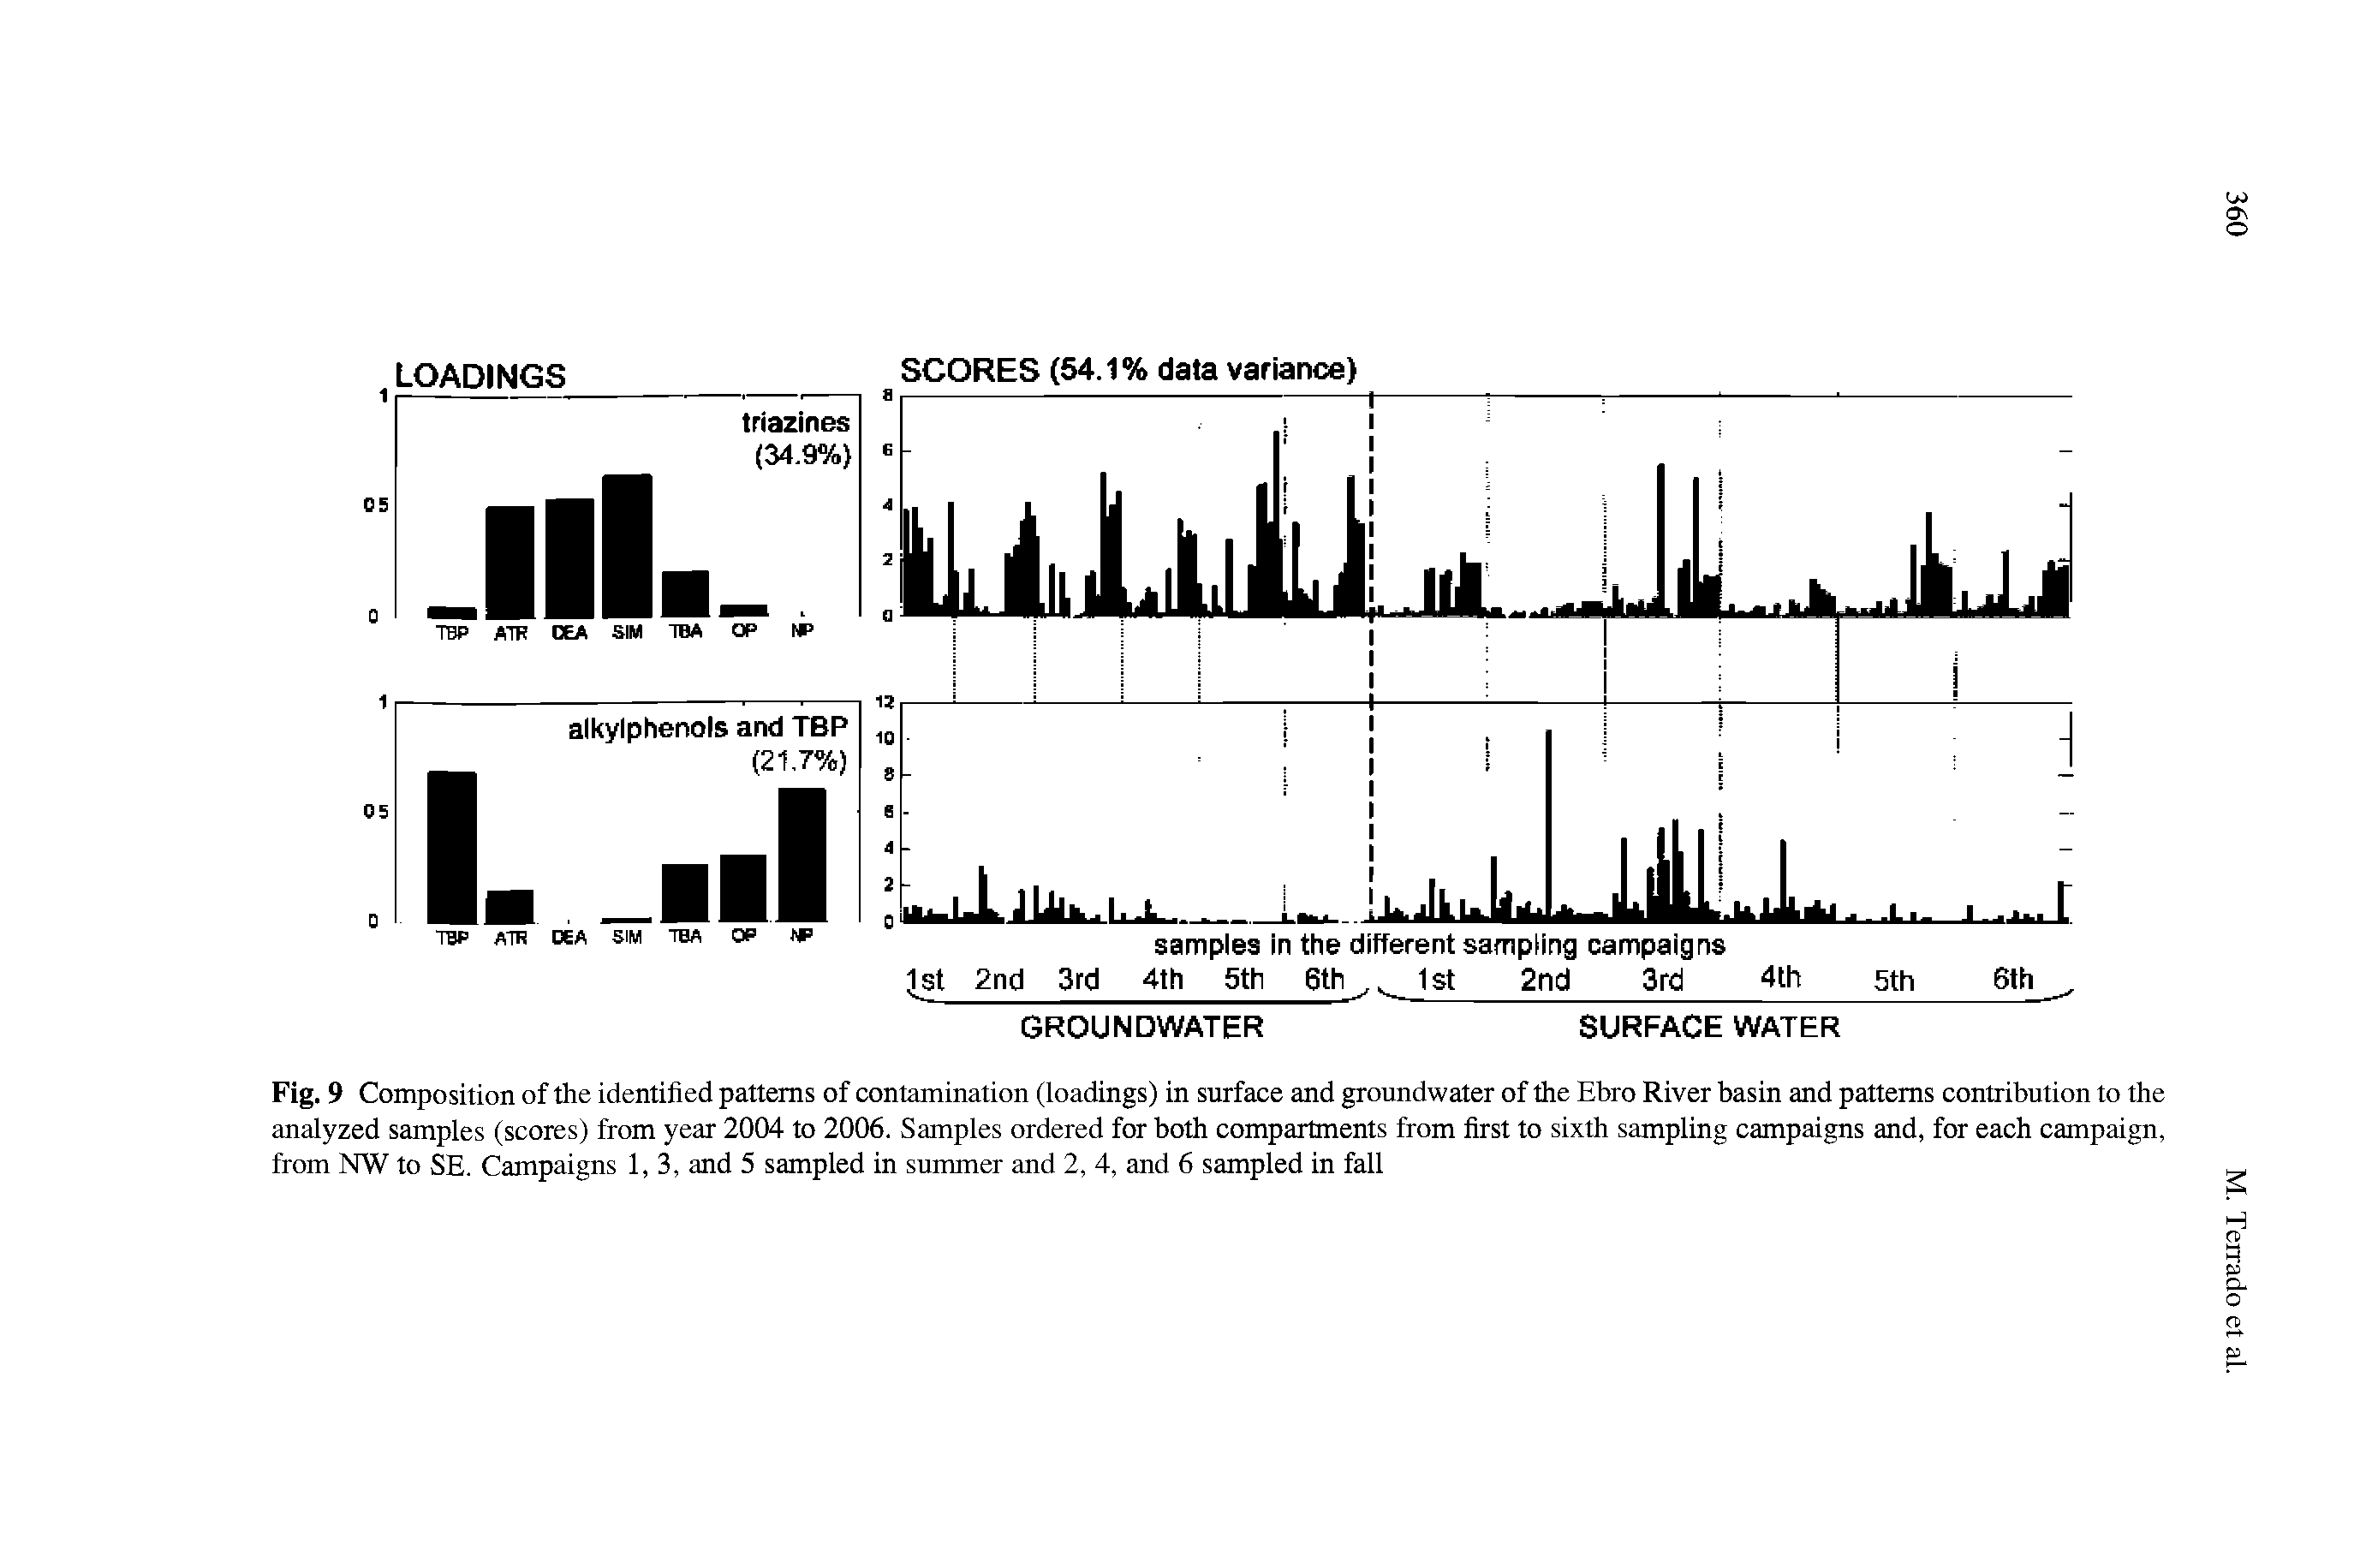 Fig. 9 Composition of the identified patterns of contamination (loadings) in surface and groundwater of the Ebro River basin and patterns contribution to the analyzed samples (scores) from year 2004 to 2006. Samples ordered for both compartments from first to sixth sampling campaigns and, for each campaign, from NW to SE. Campaigns 1,3, and 5 sampled in summer and 2, 4, and 6 sampled in fall...